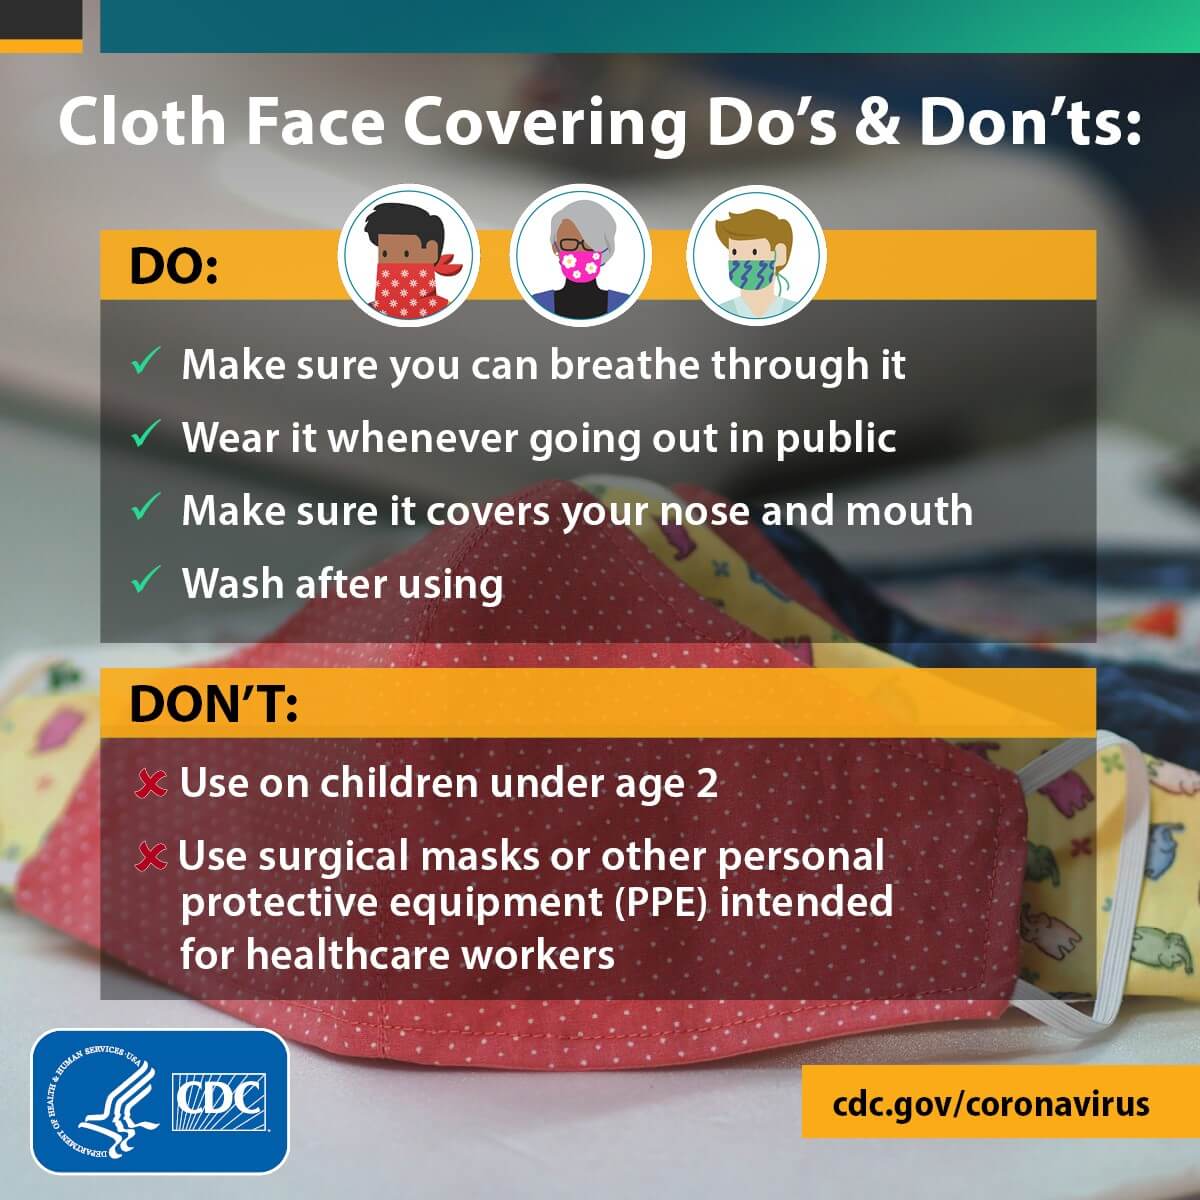 Cloth face covering Do's & Don'ts